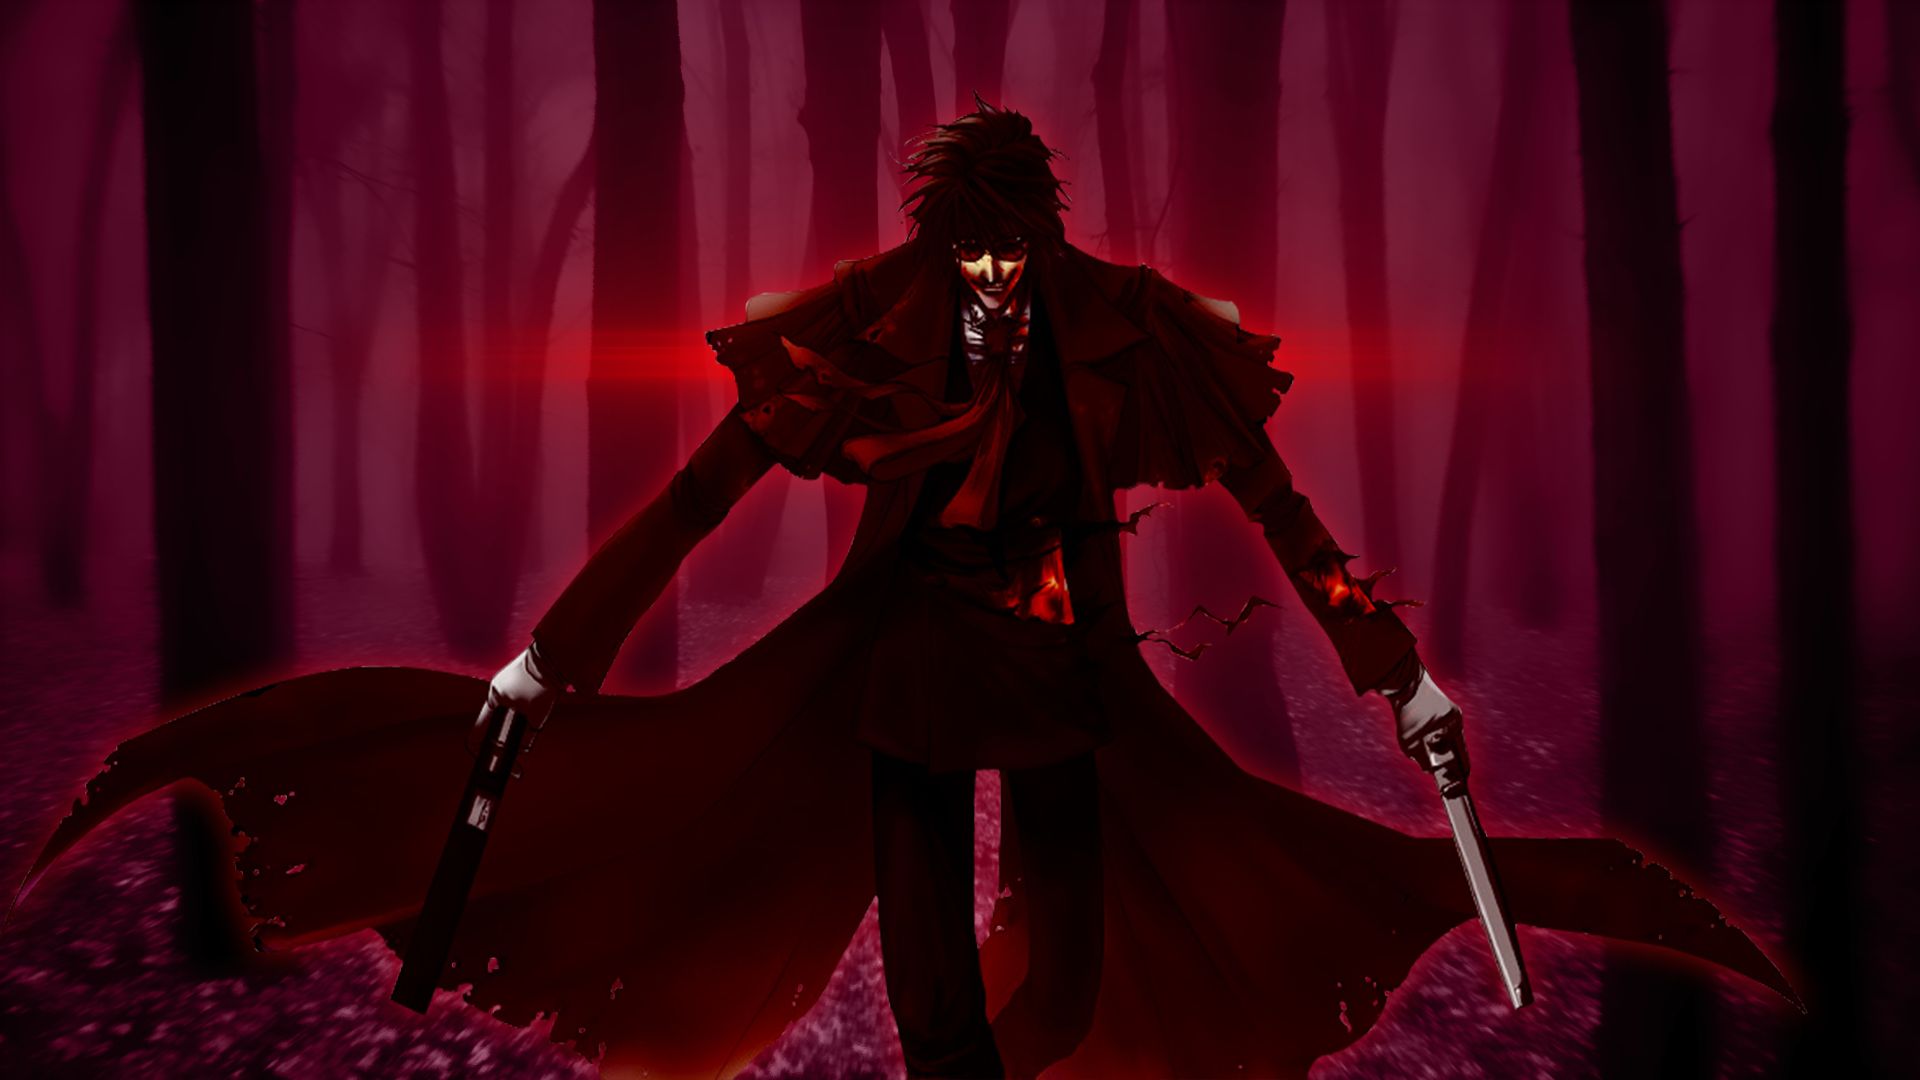 Alucard (Hellsing) wallpapers for desktop, download free Alucard (Hellsing)  pictures and backgrounds for PC 